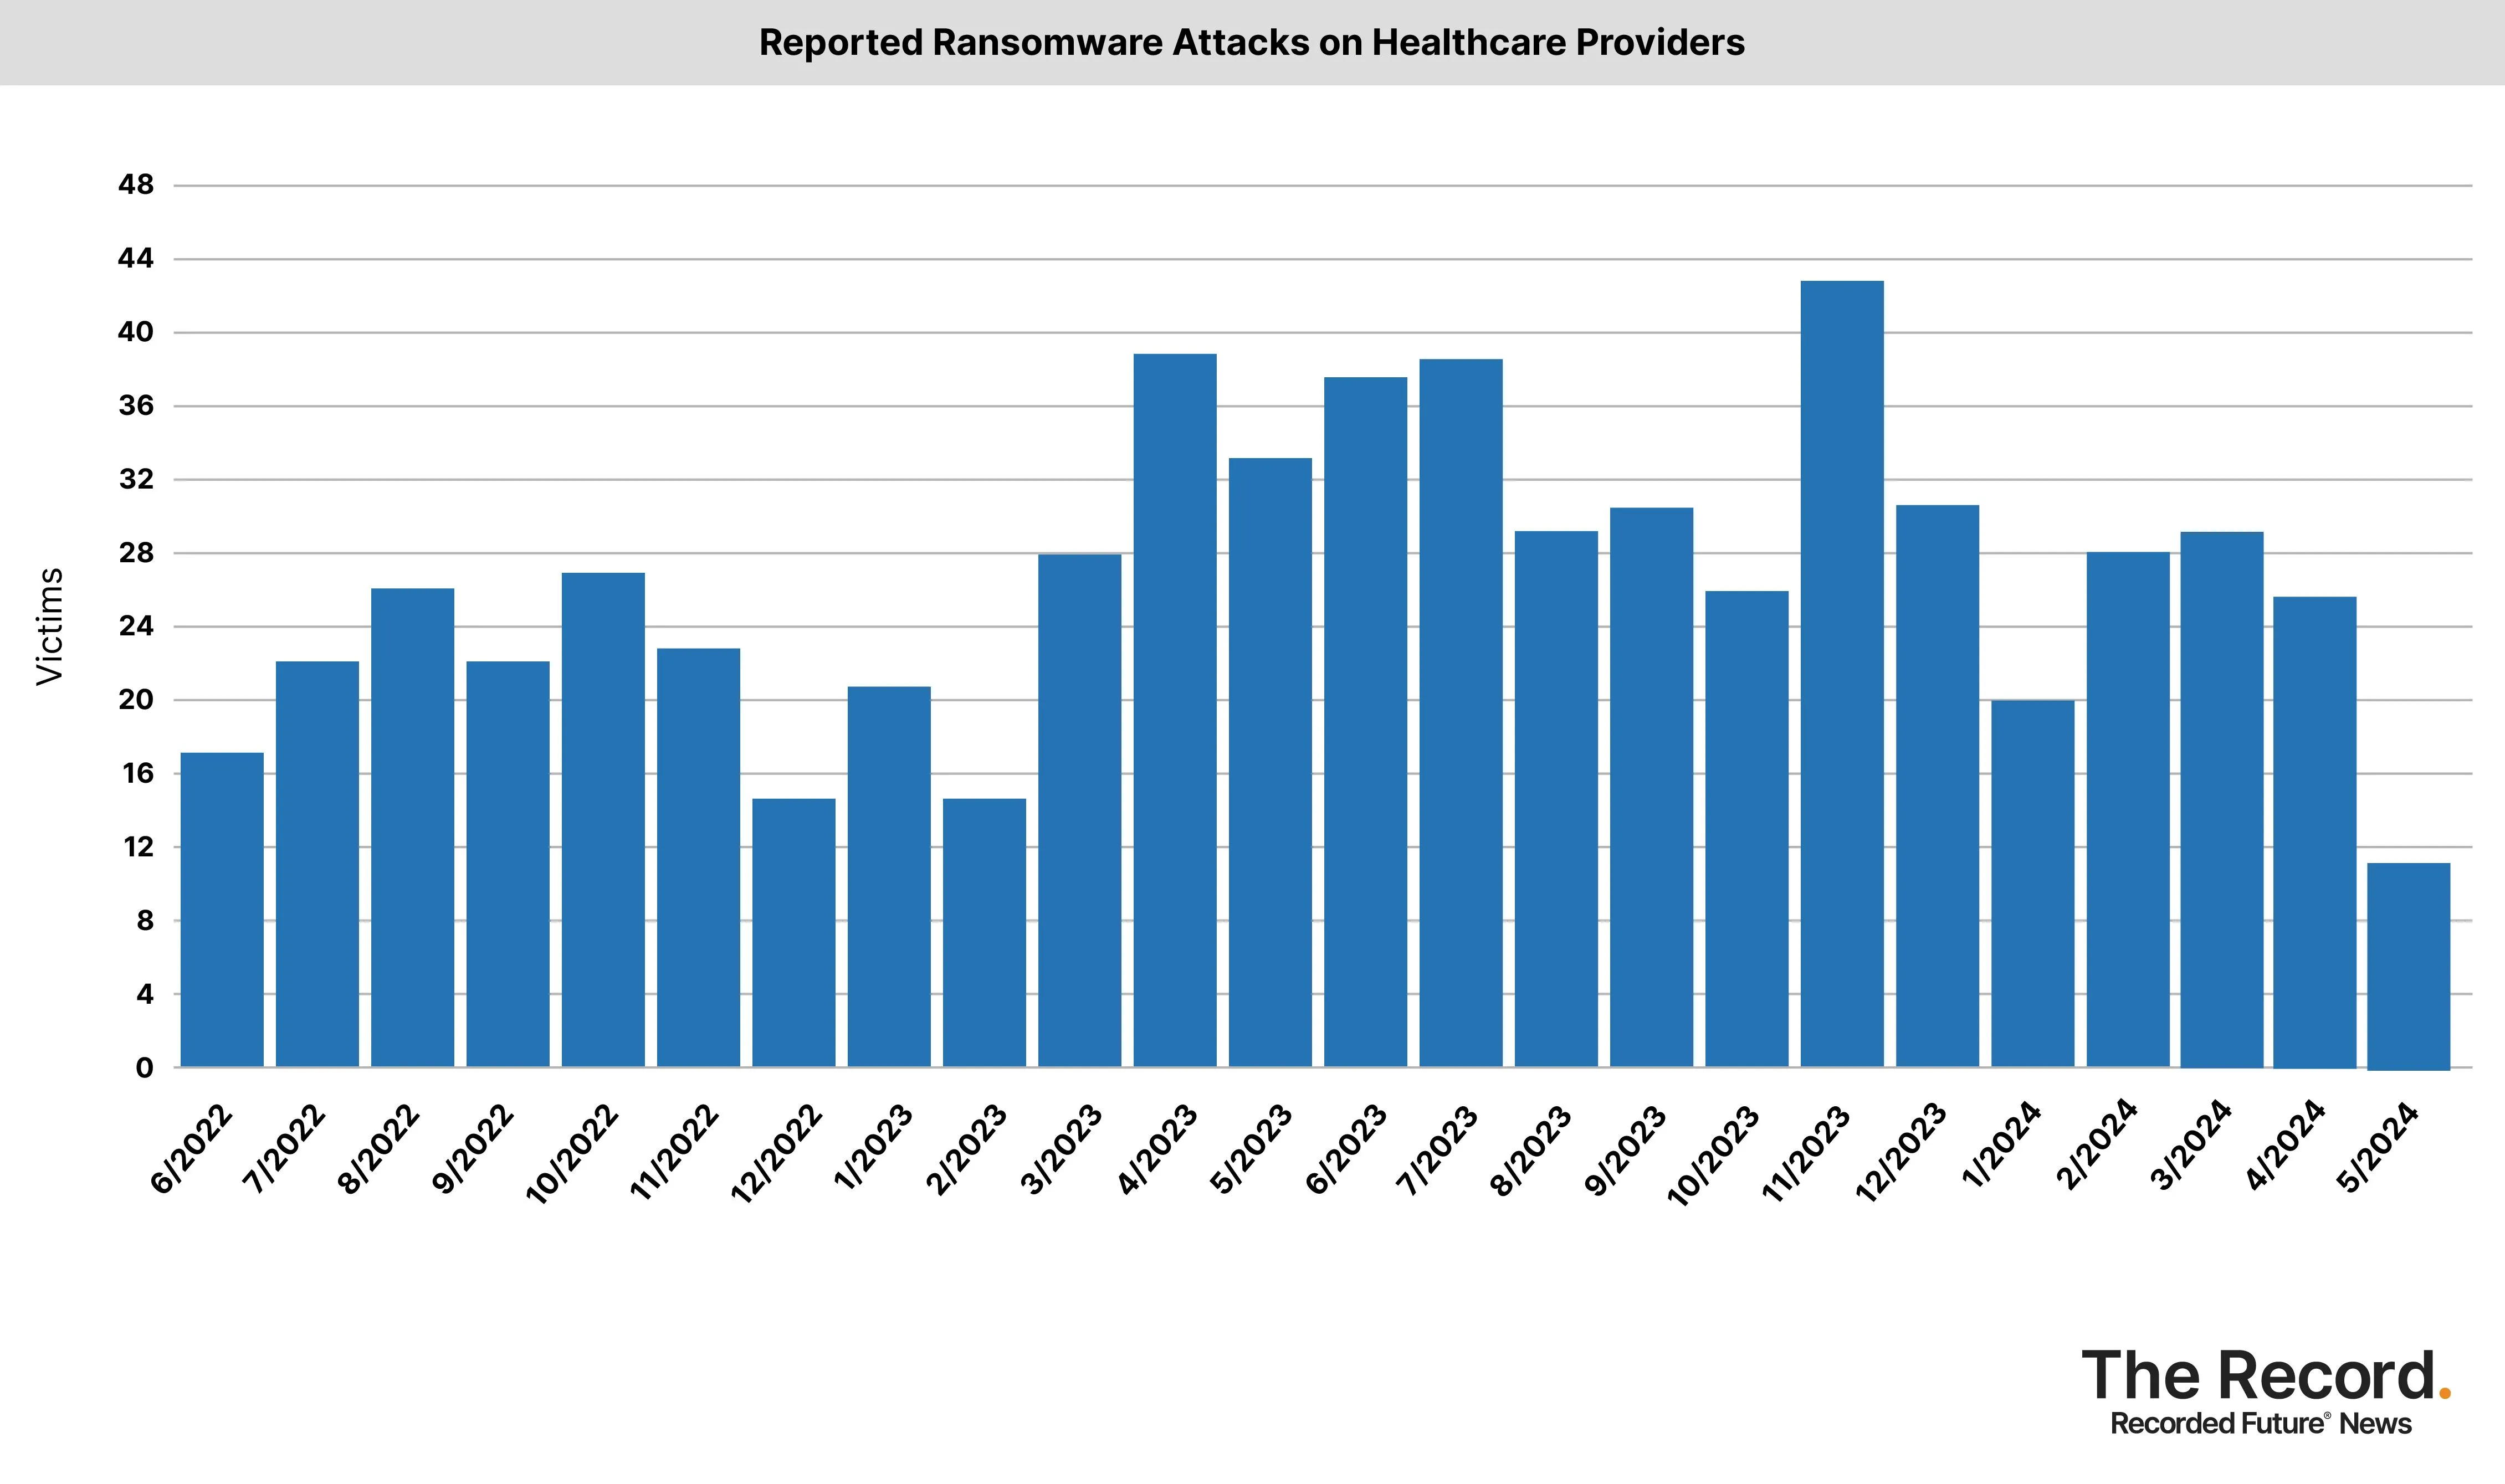 2024_0607 - Ransomware Tracker_Reported Ransomware Attacks on Healthcare Providers.jpg